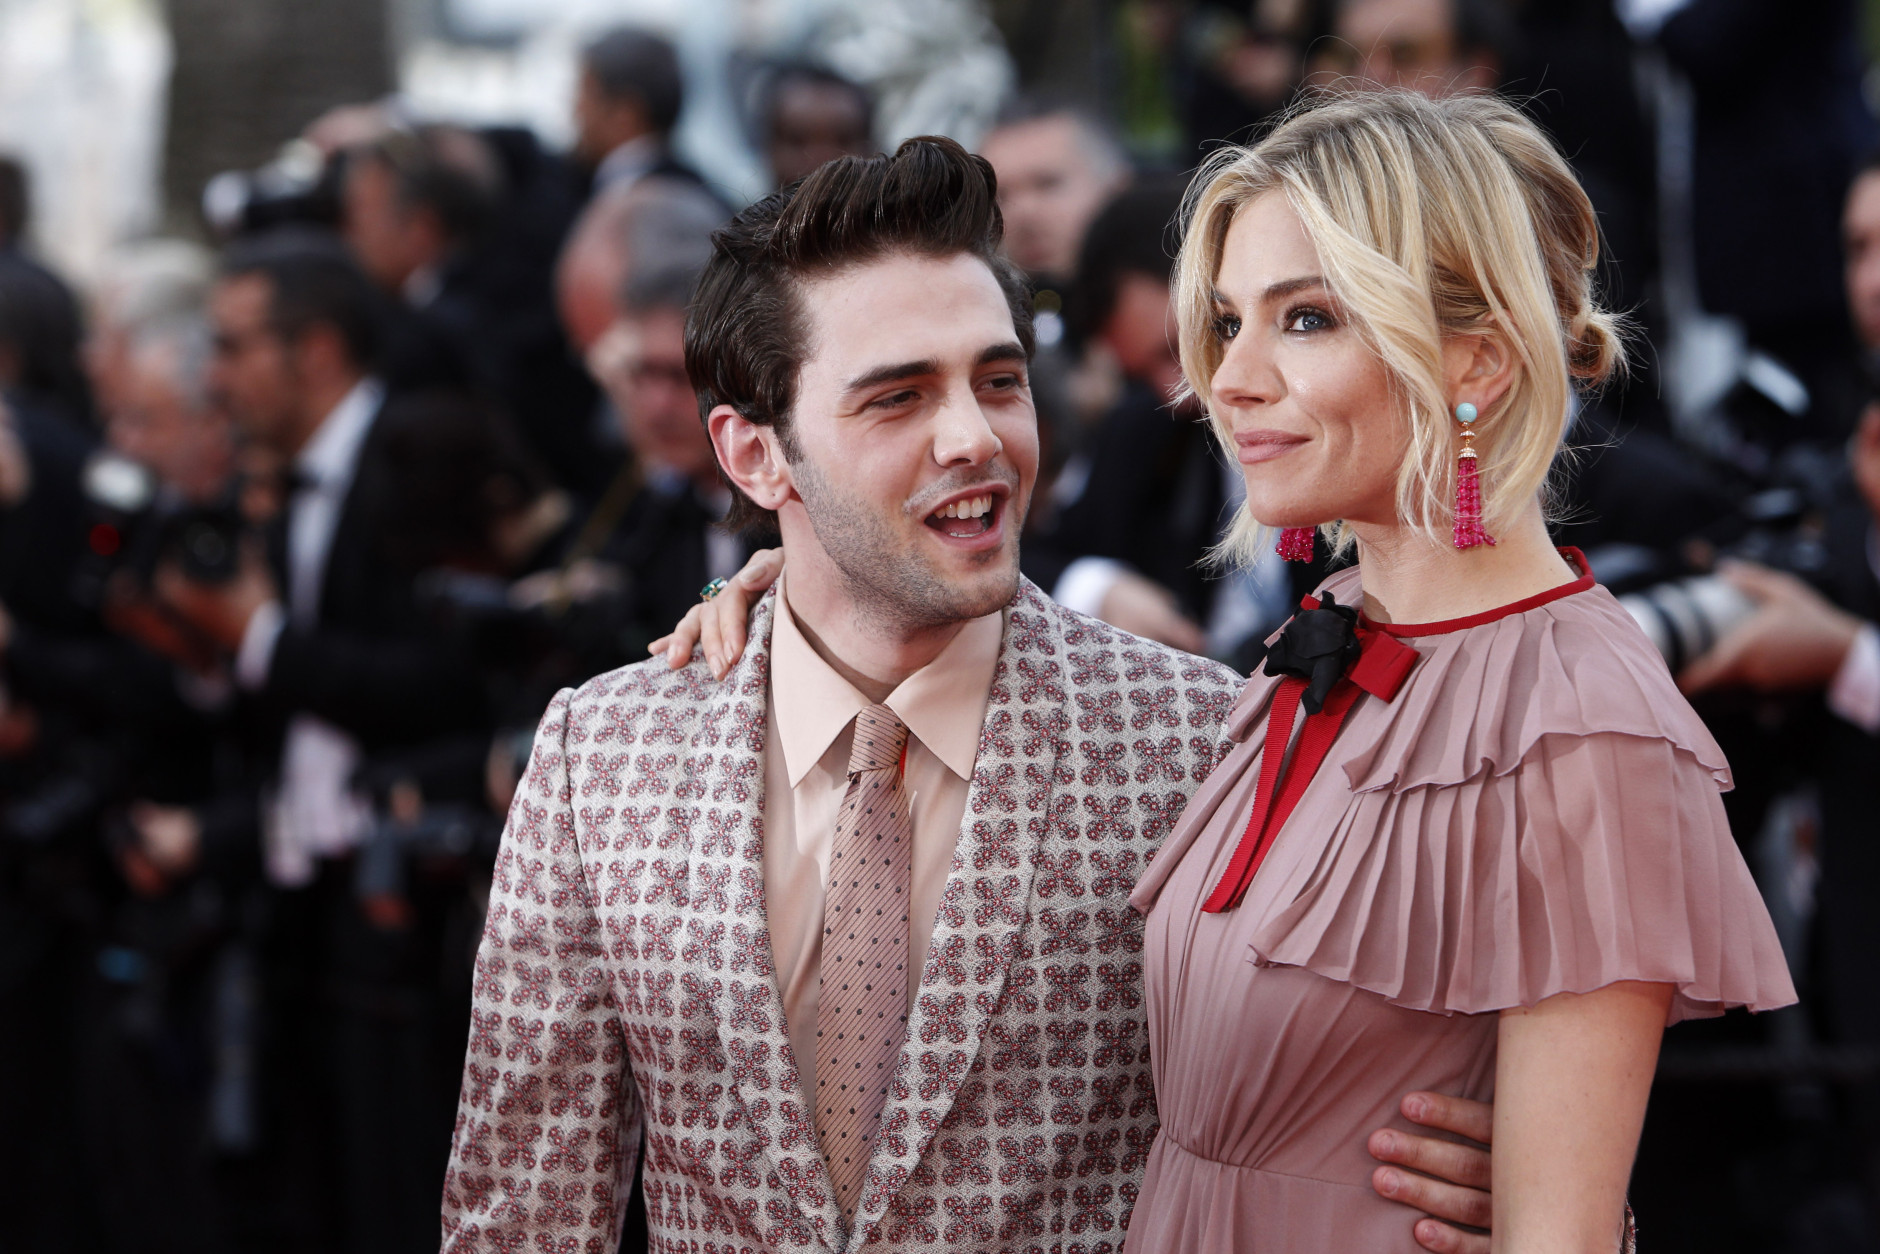 Jury members Sienna Miller, right, and Xavier Dolan pose for photographers upon arrival for the screening of the film Macbeth at the 68th international film festival, Cannes, southern France, Saturday, May 23, 2015. (AP Photo/Lionel Cironneau)